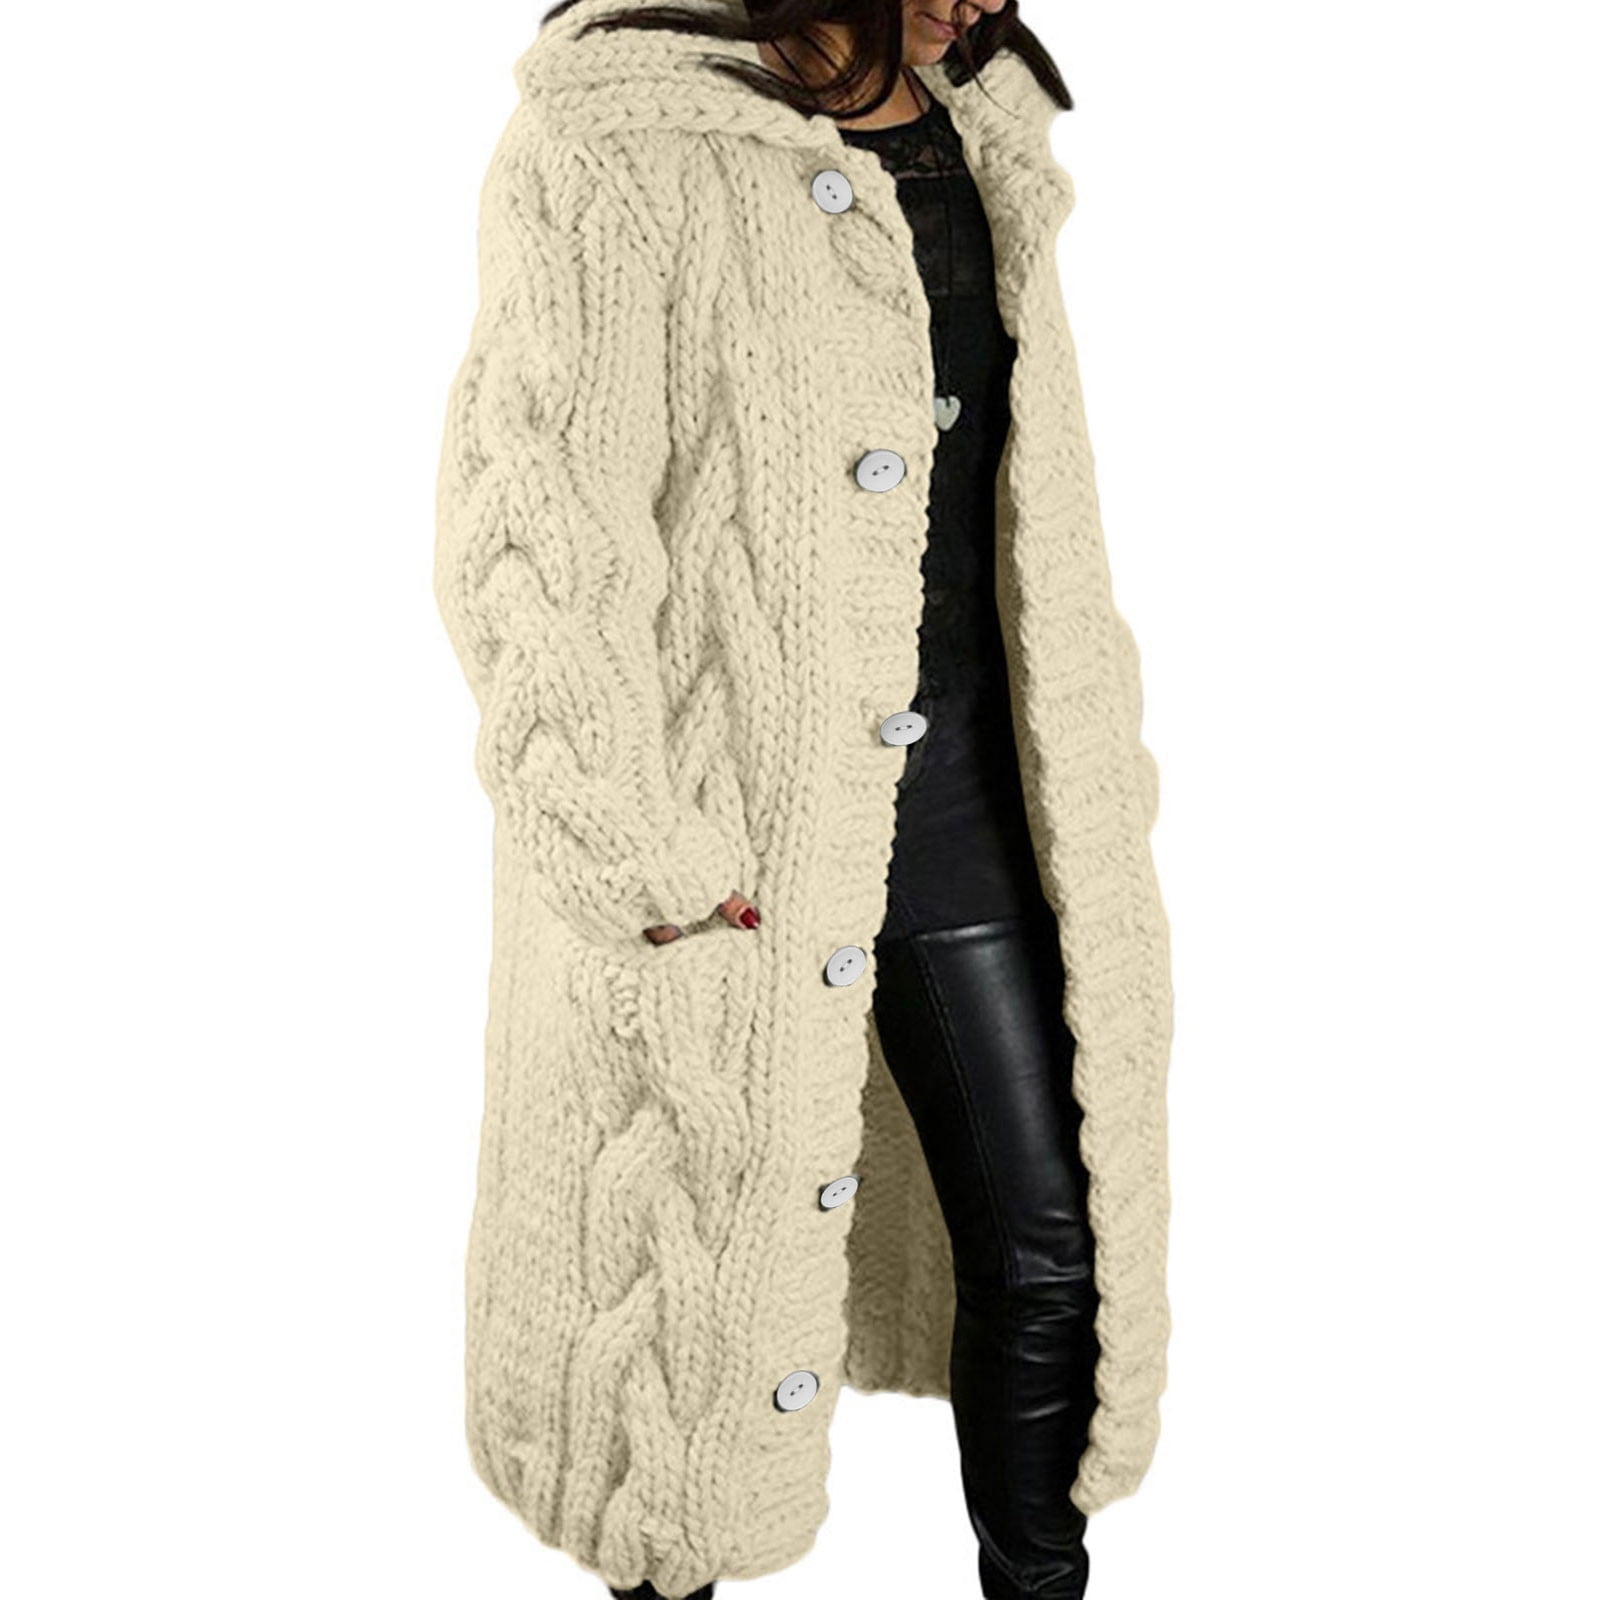 Winter Coats for Women Winter Cardigan Sweaters for Women Cable Knit ...